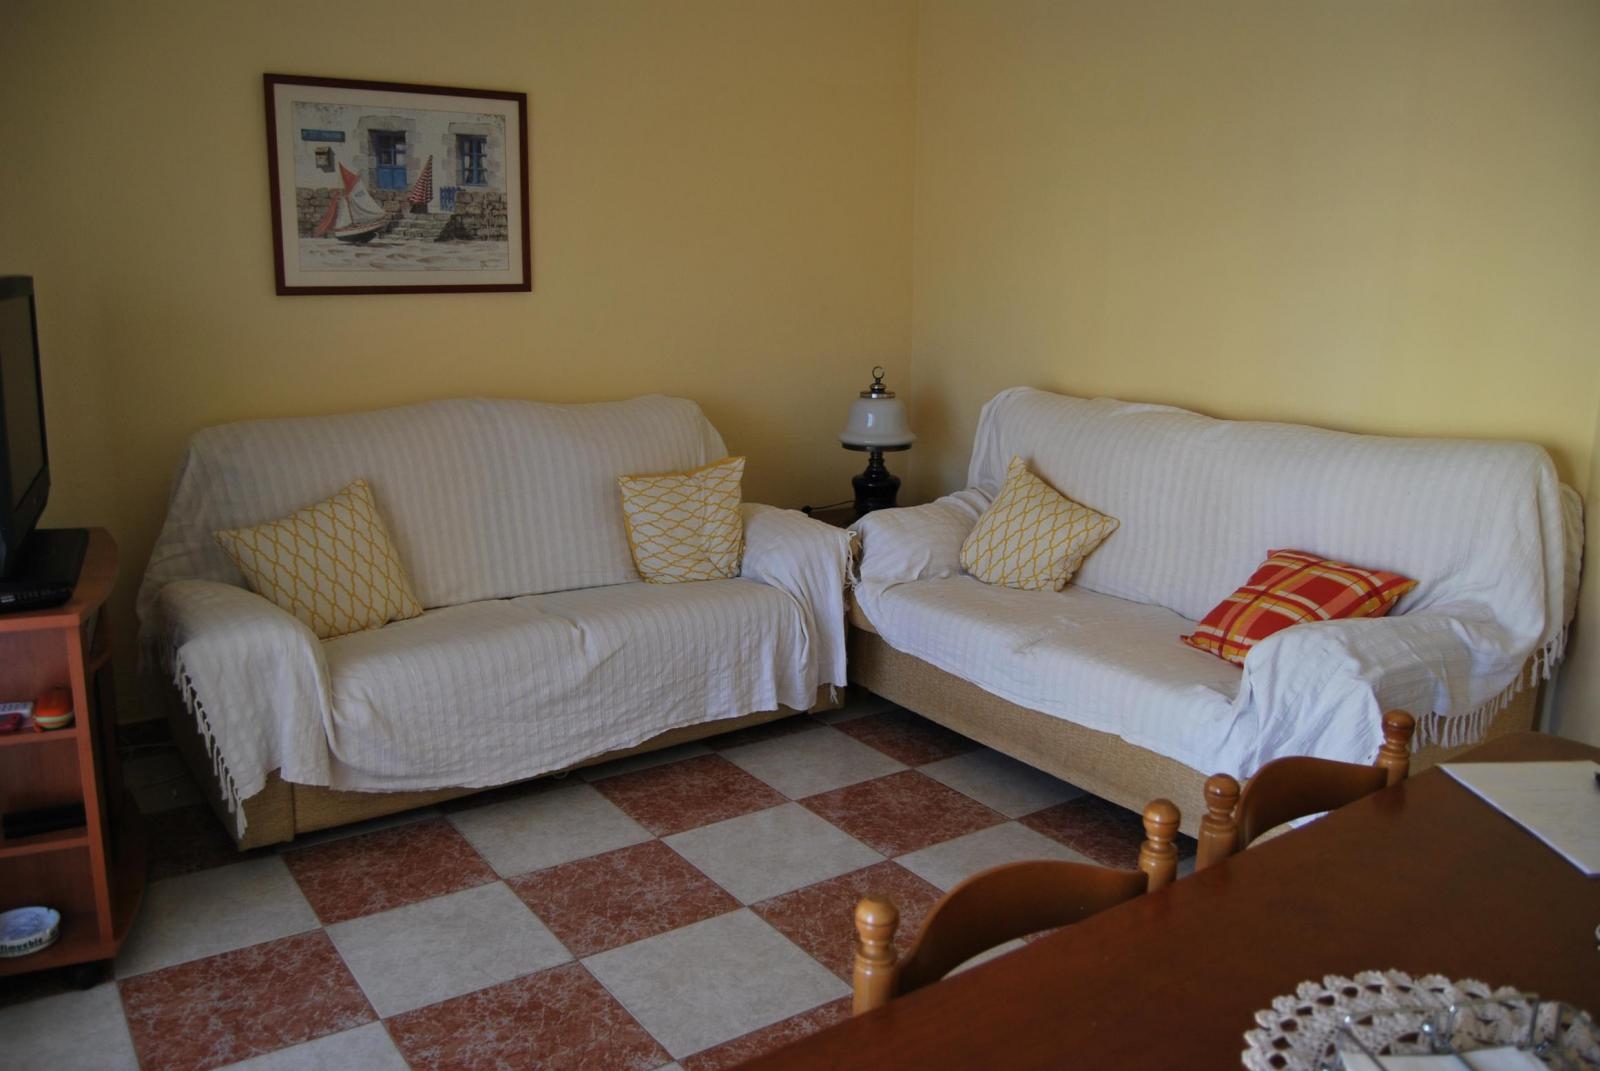 Apartment for rent on the seafront in Salobreña